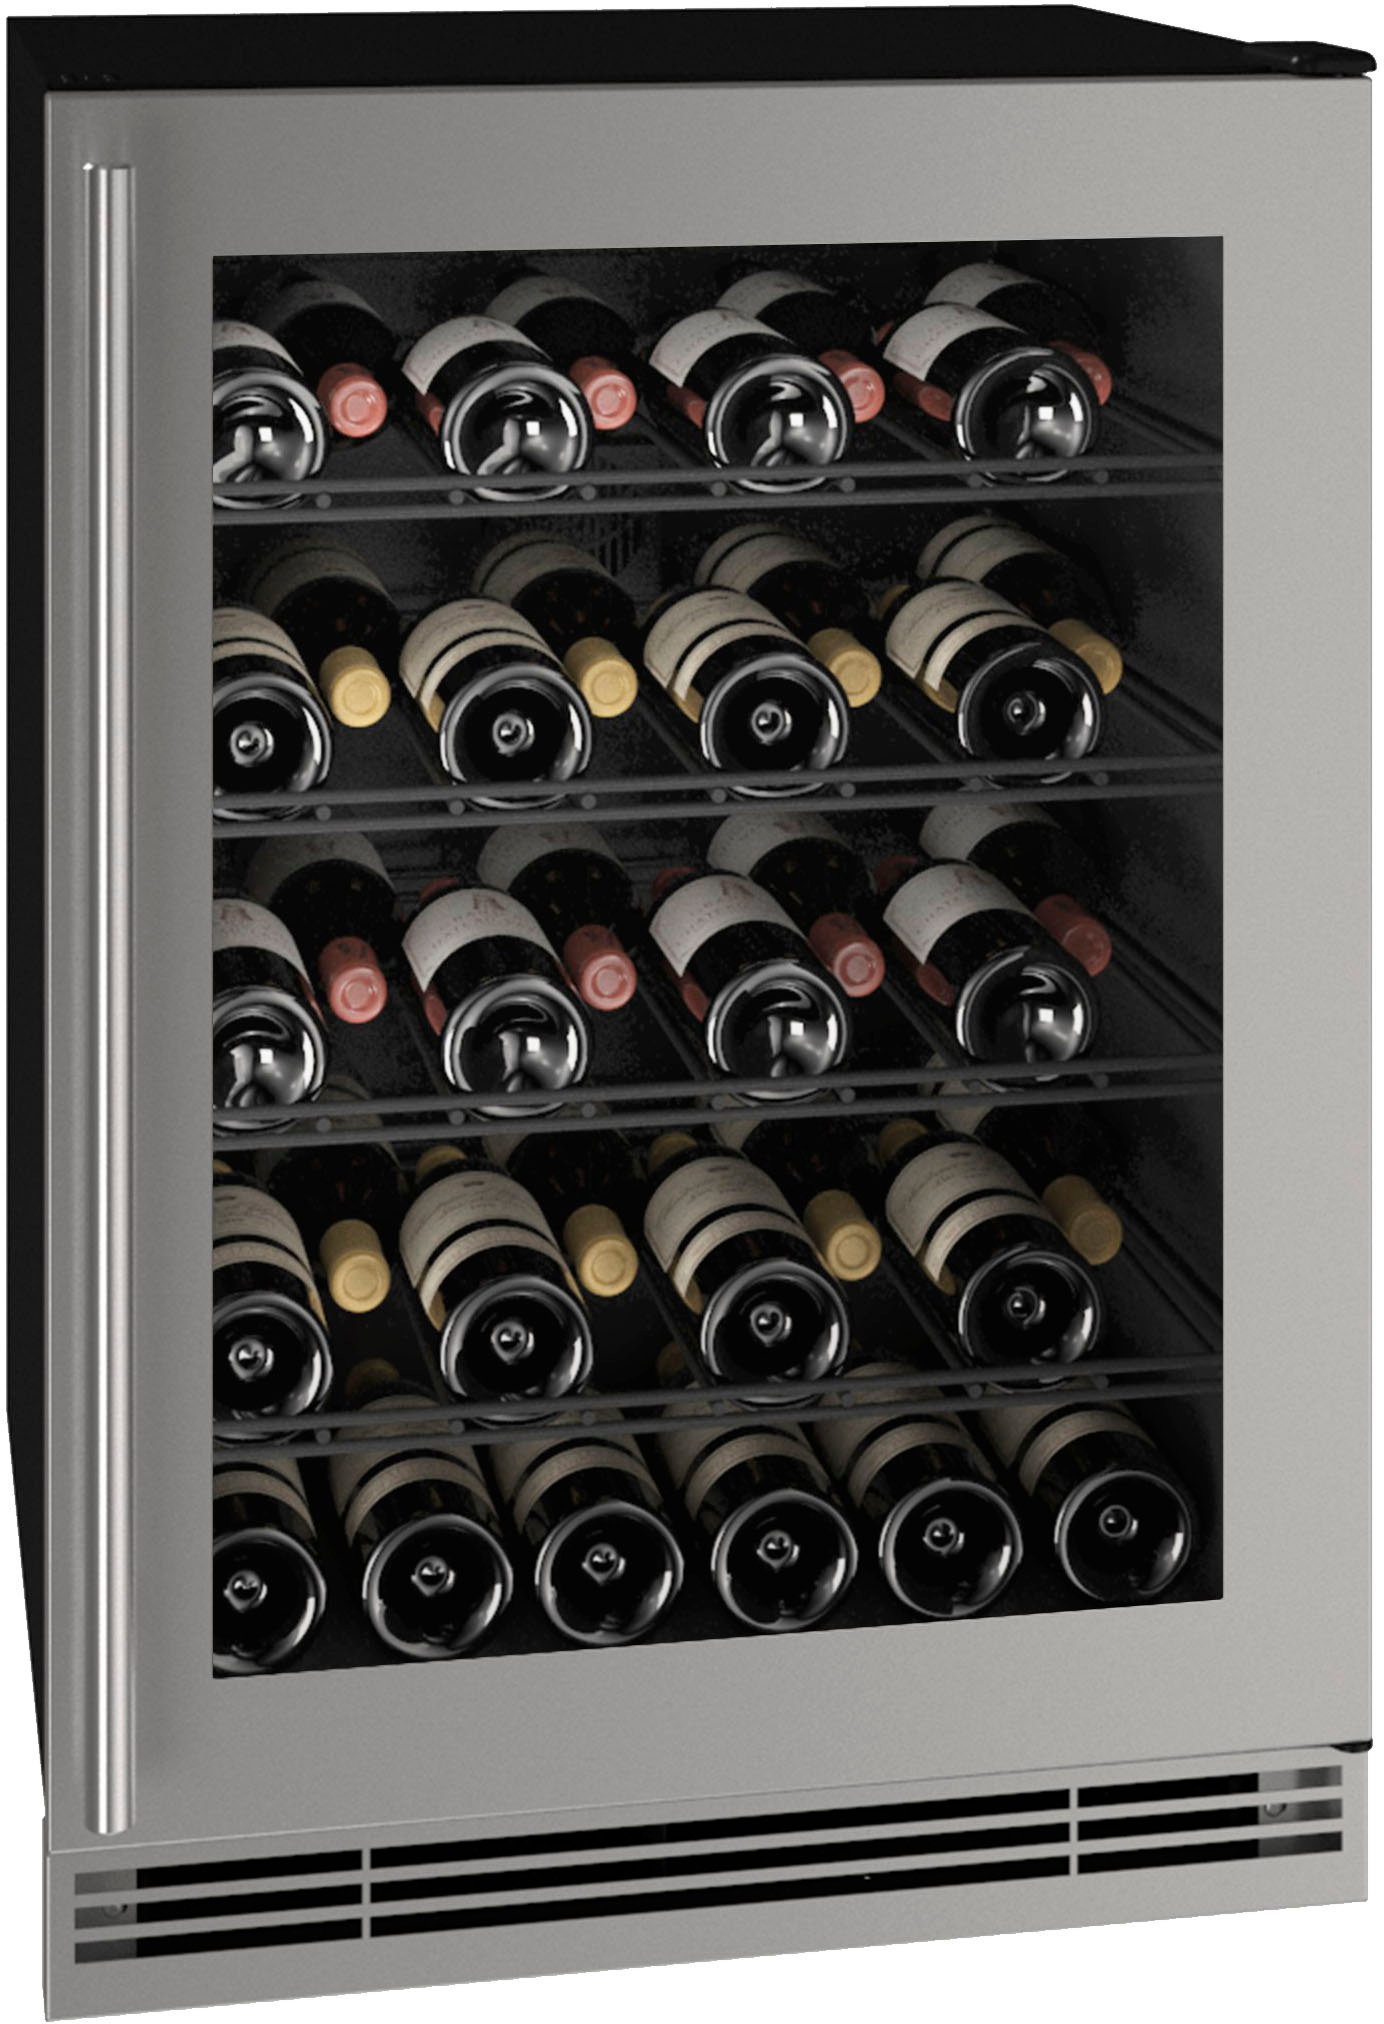 Angle View: U-Line - 5.4 cu ft 38-750ml bottle Wine Refrigerator - Stainless steel